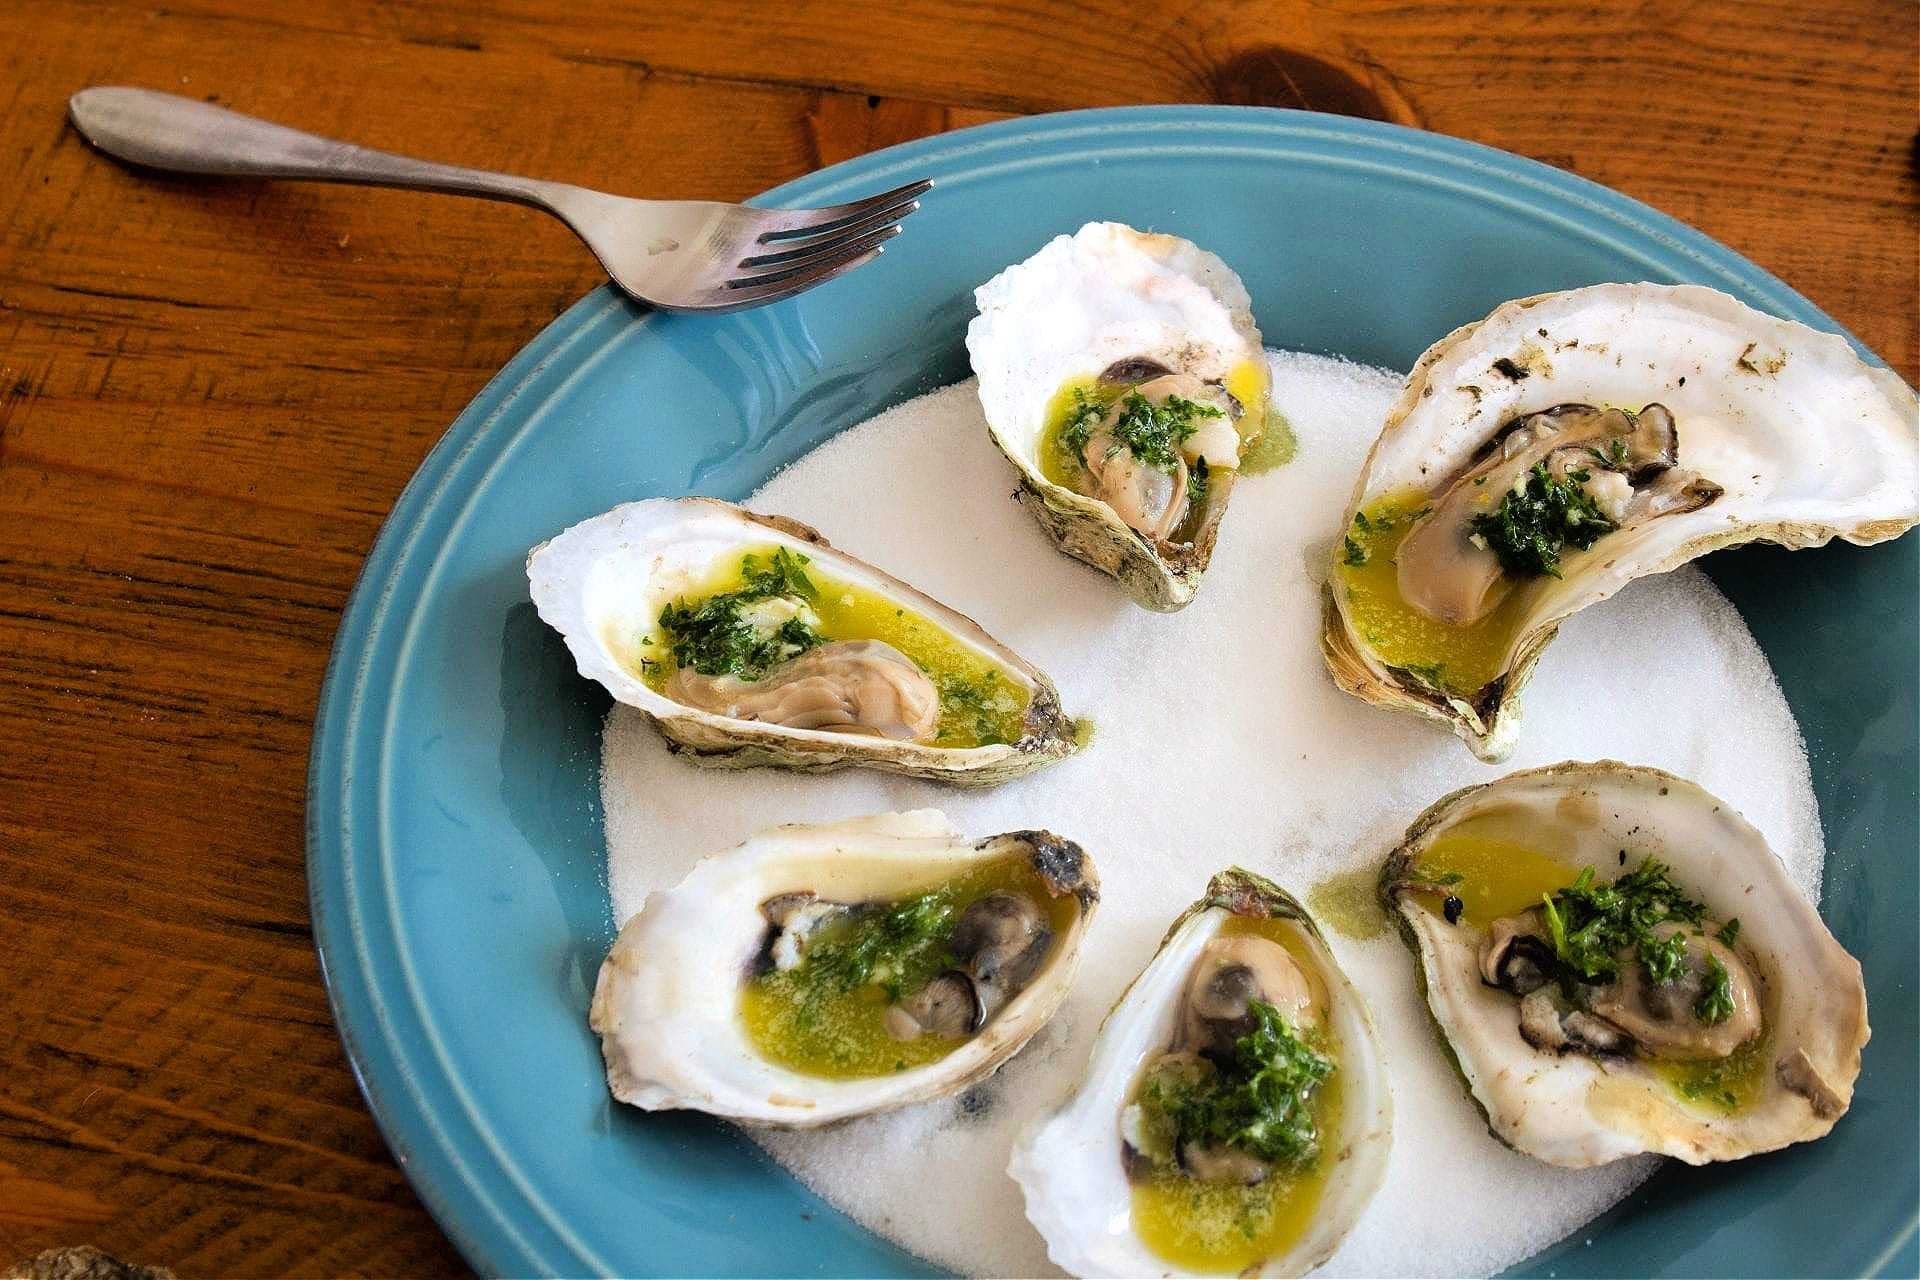 Grilled Oysters with Citrus and Olive Oil Gremolata